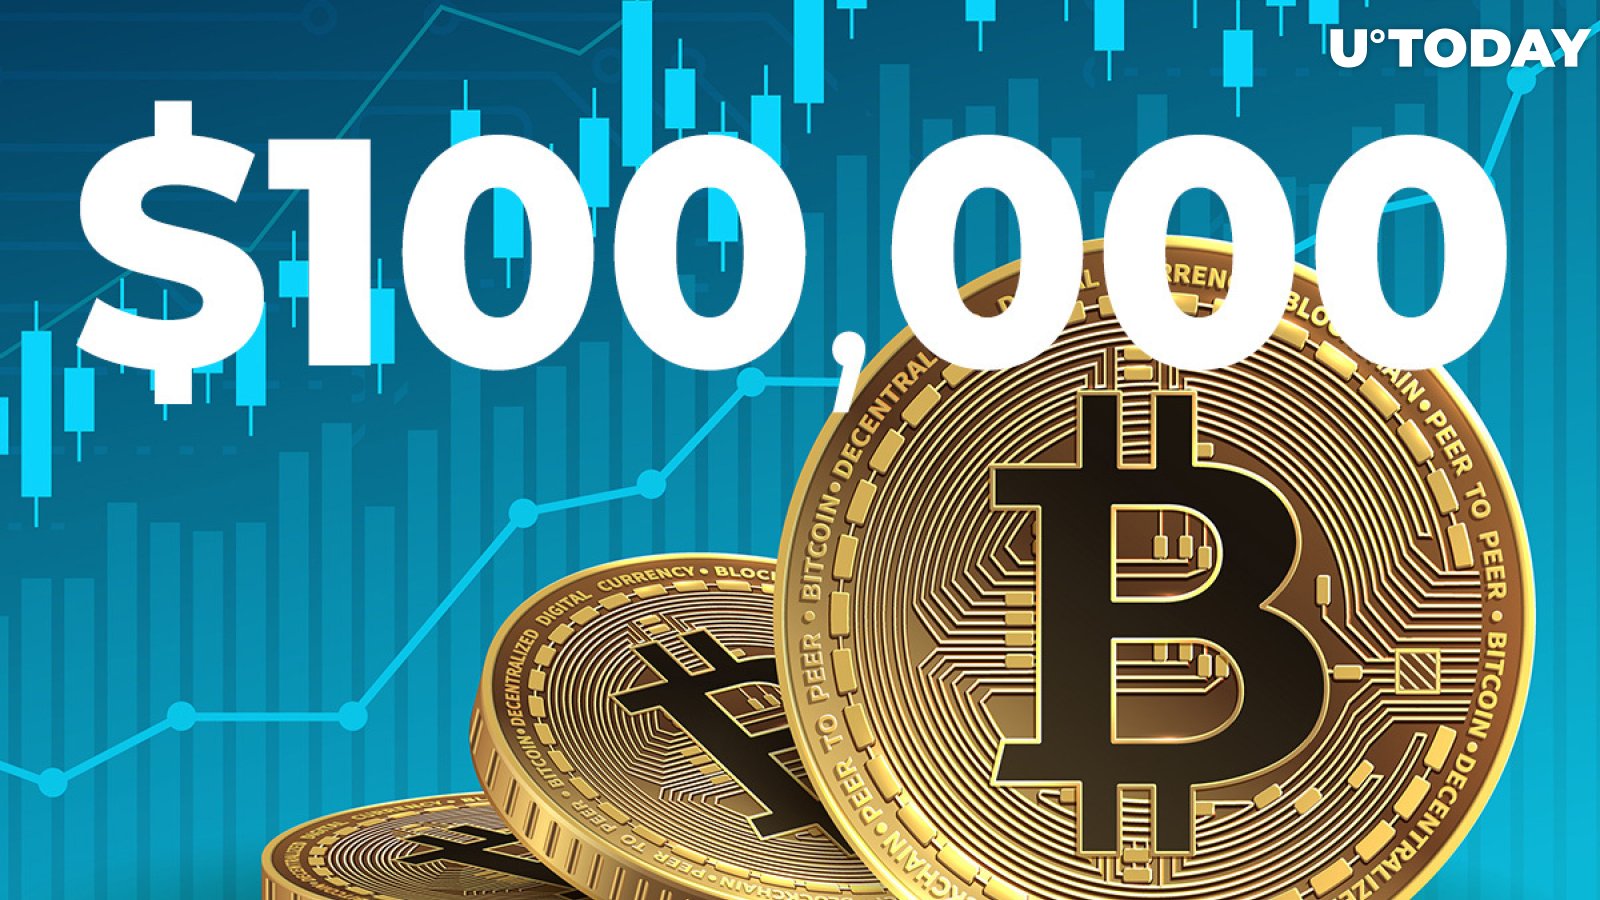 Bitcoin Is More Likely to Resume Moving to $100,000 Than Stay Under $20,000: Bloomberg Report